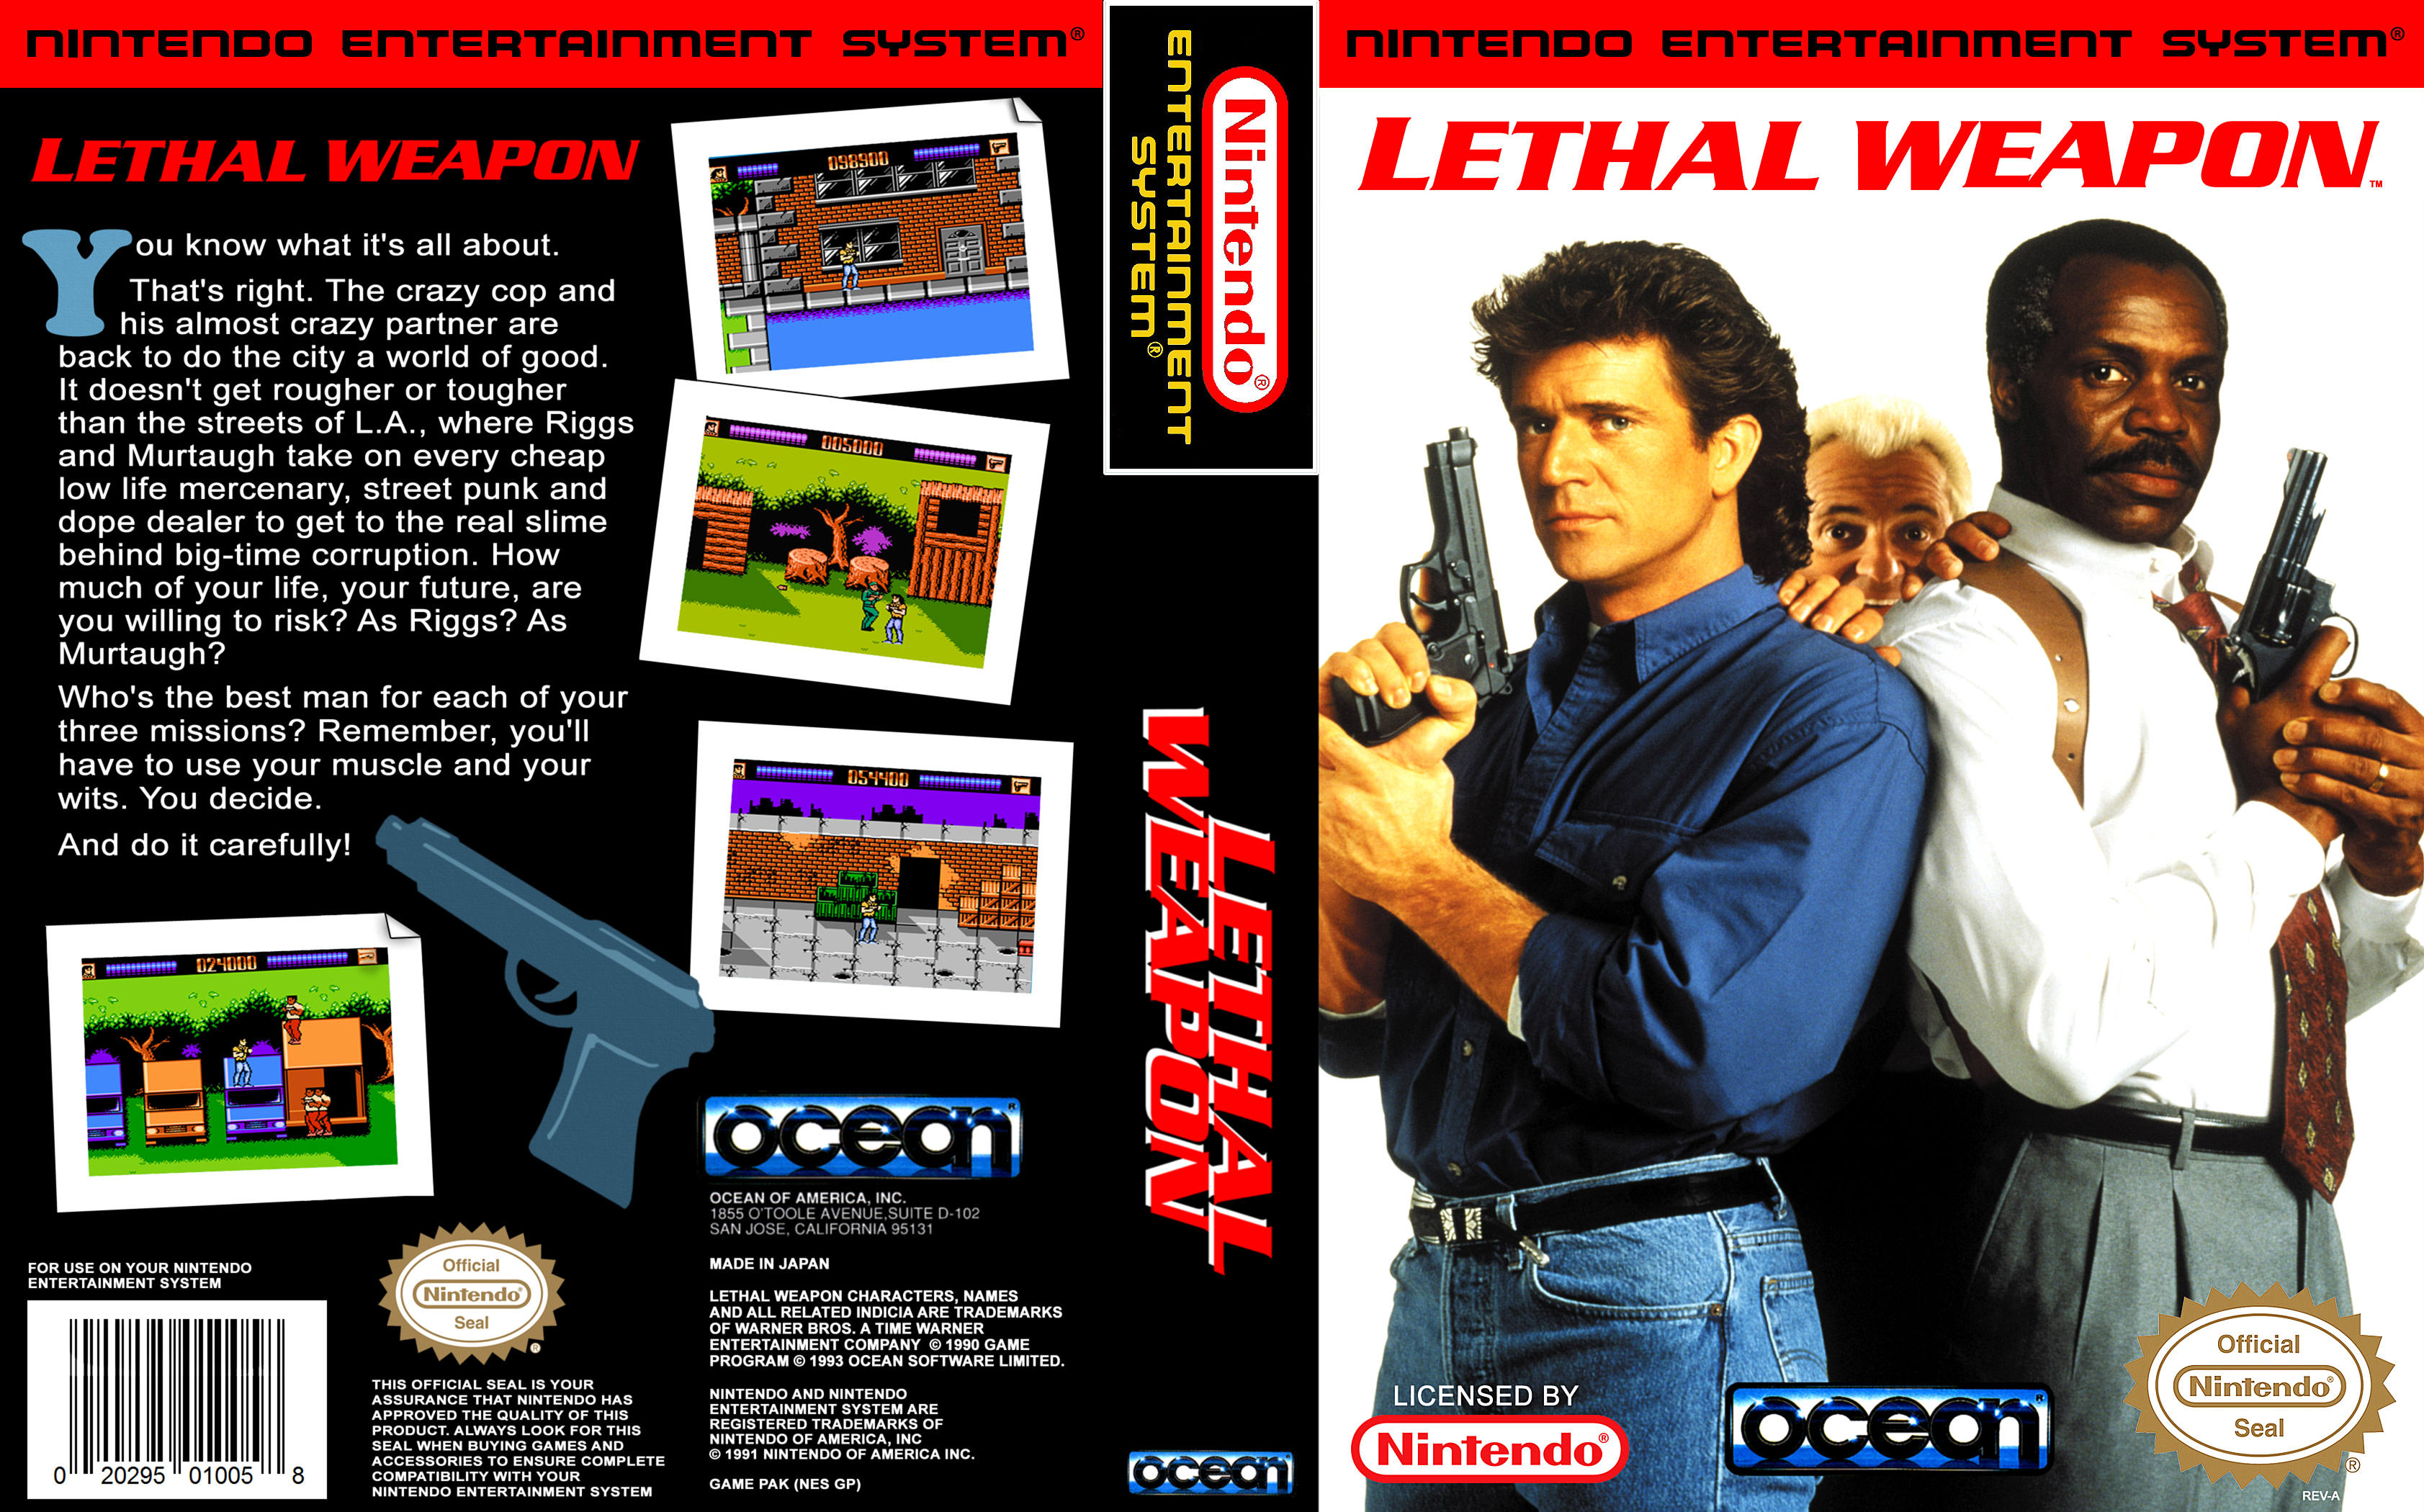 Lethal Weapon Денди. Lethal Weapon NES обложка. Dendy Lethal Weapon 2. Weapon игра Денди.. Lethal company 49